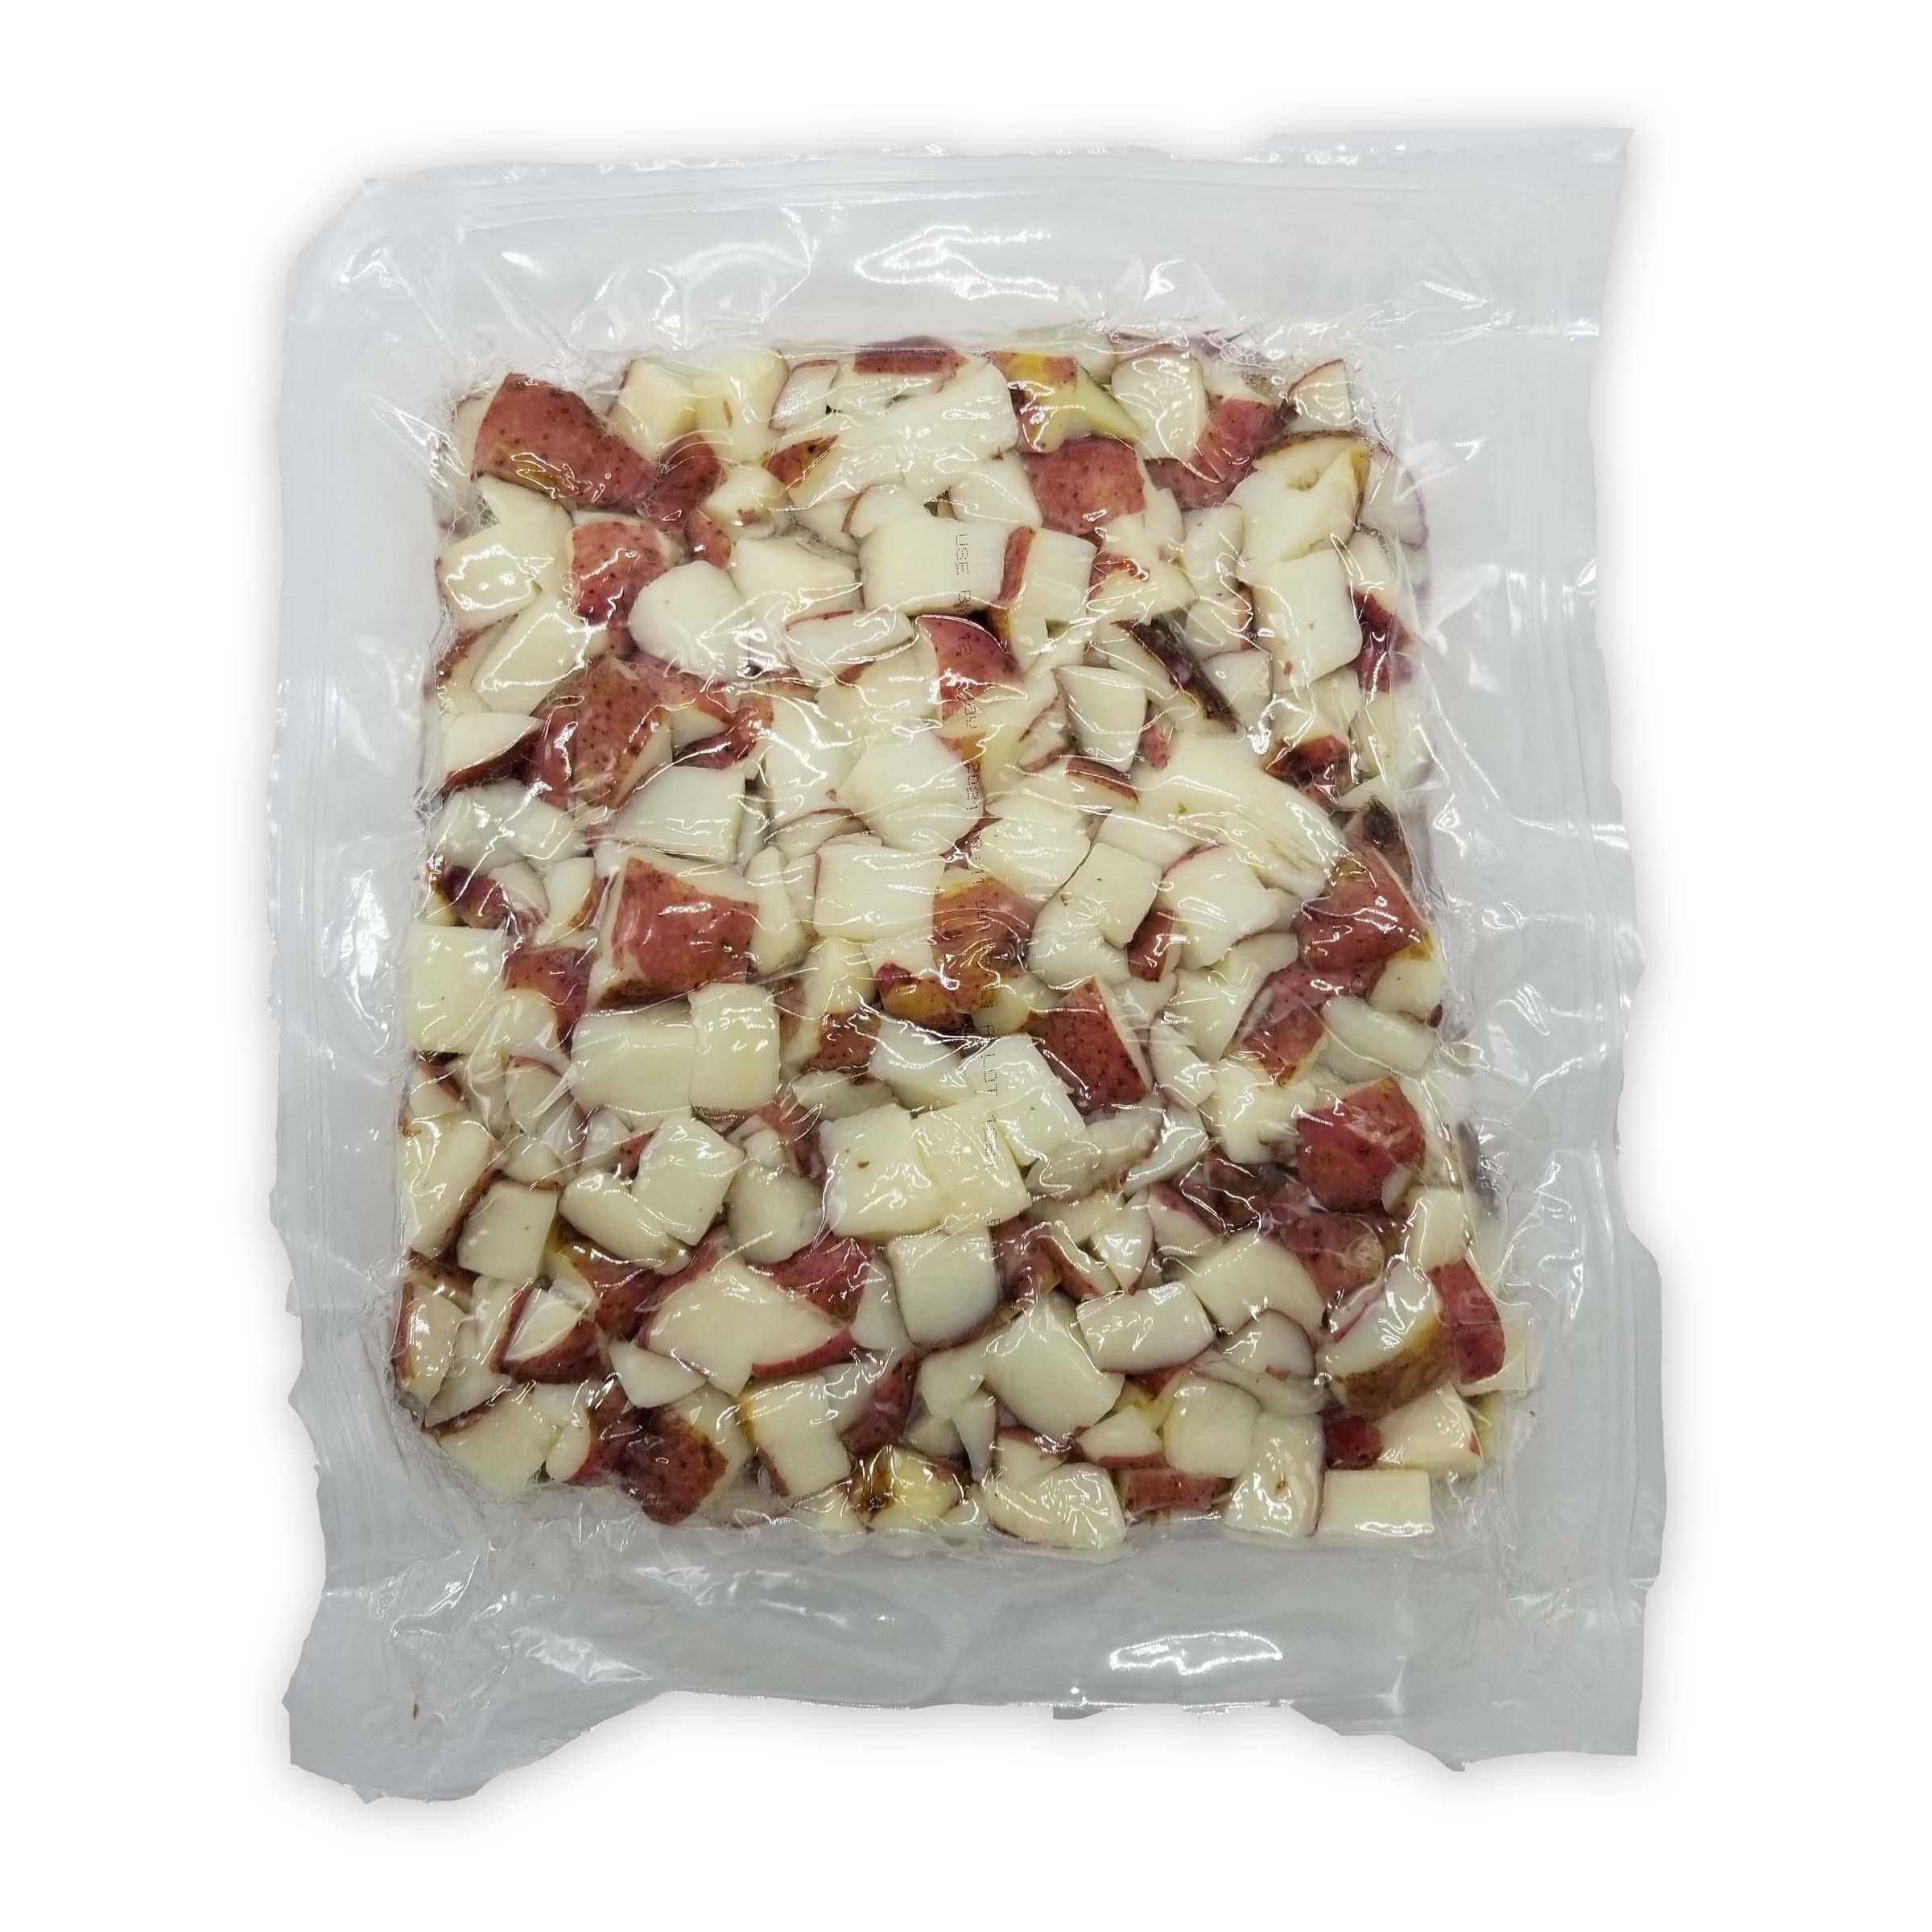 Simply Potatoes® Refrigerated 1″ Red Skin Diced Potatoes made with skin-on Red potatoes diced 1″ x 7/8″ x 3/4″, 2/10 Lb Bags